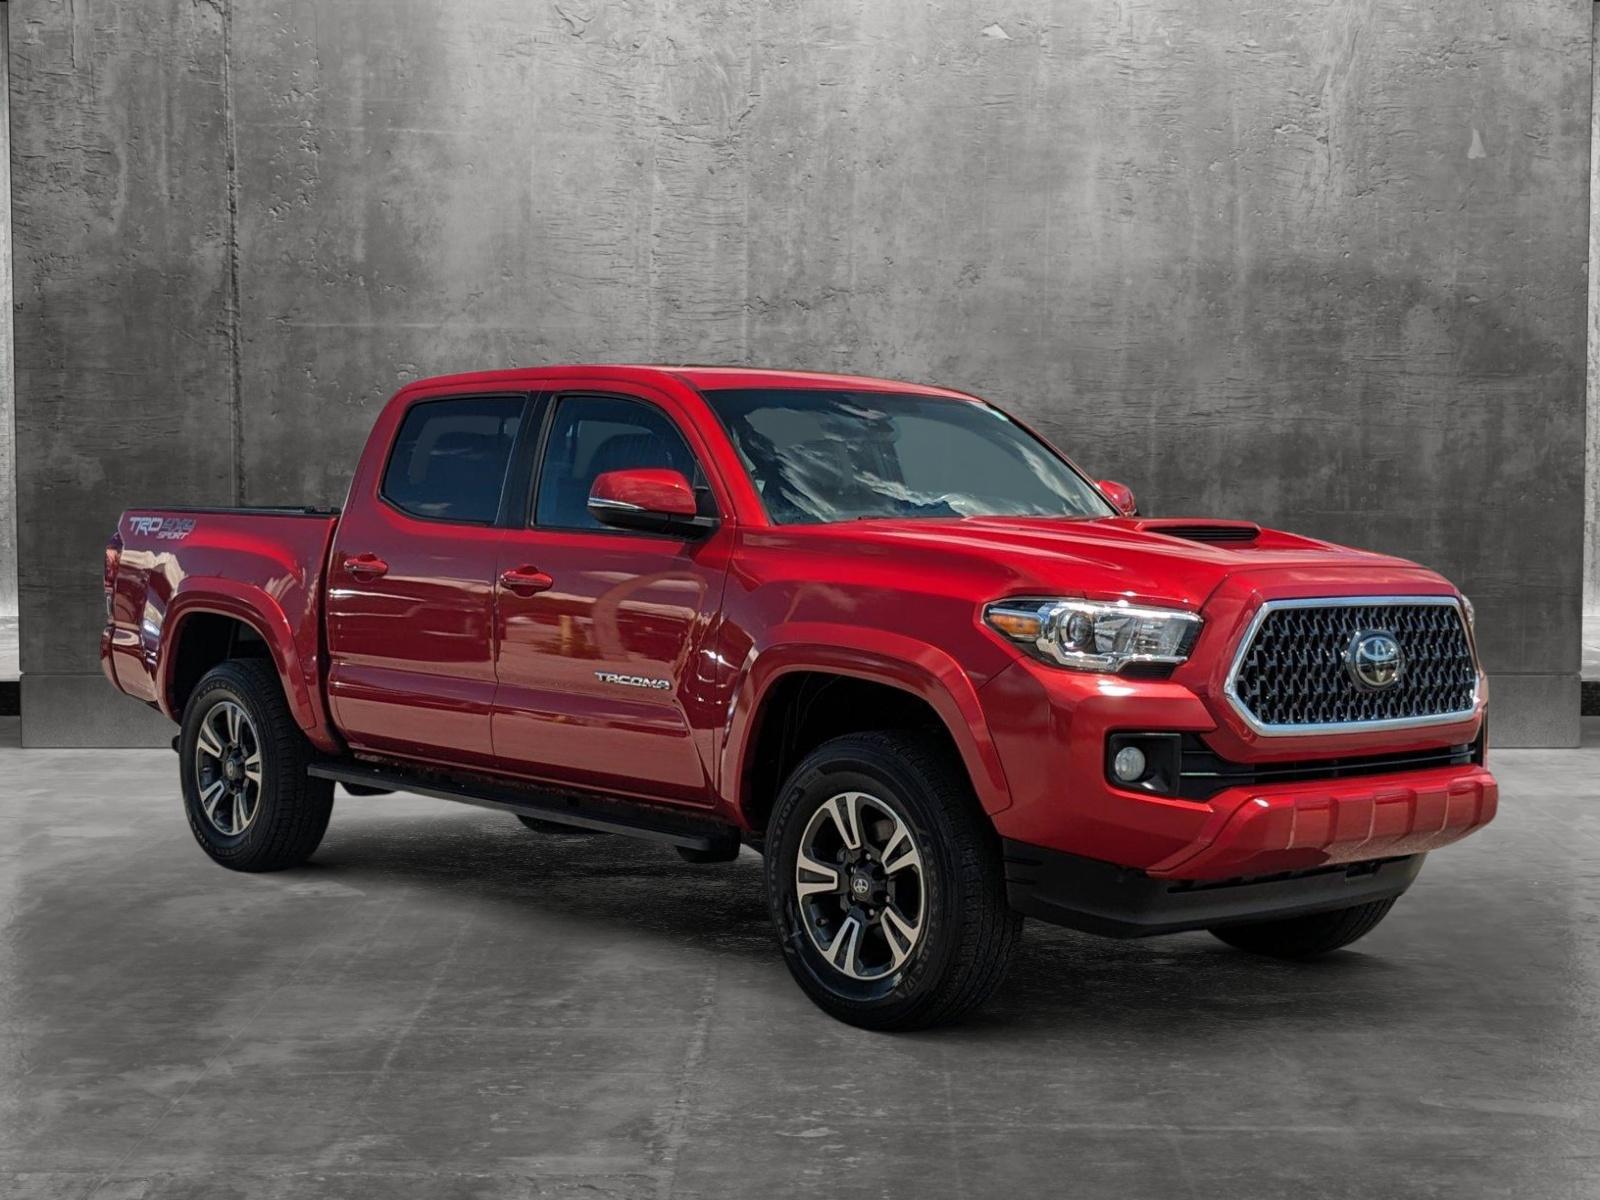 2019 Toyota Tacoma 4WD Vehicle Photo in St. Petersburg, FL 33713